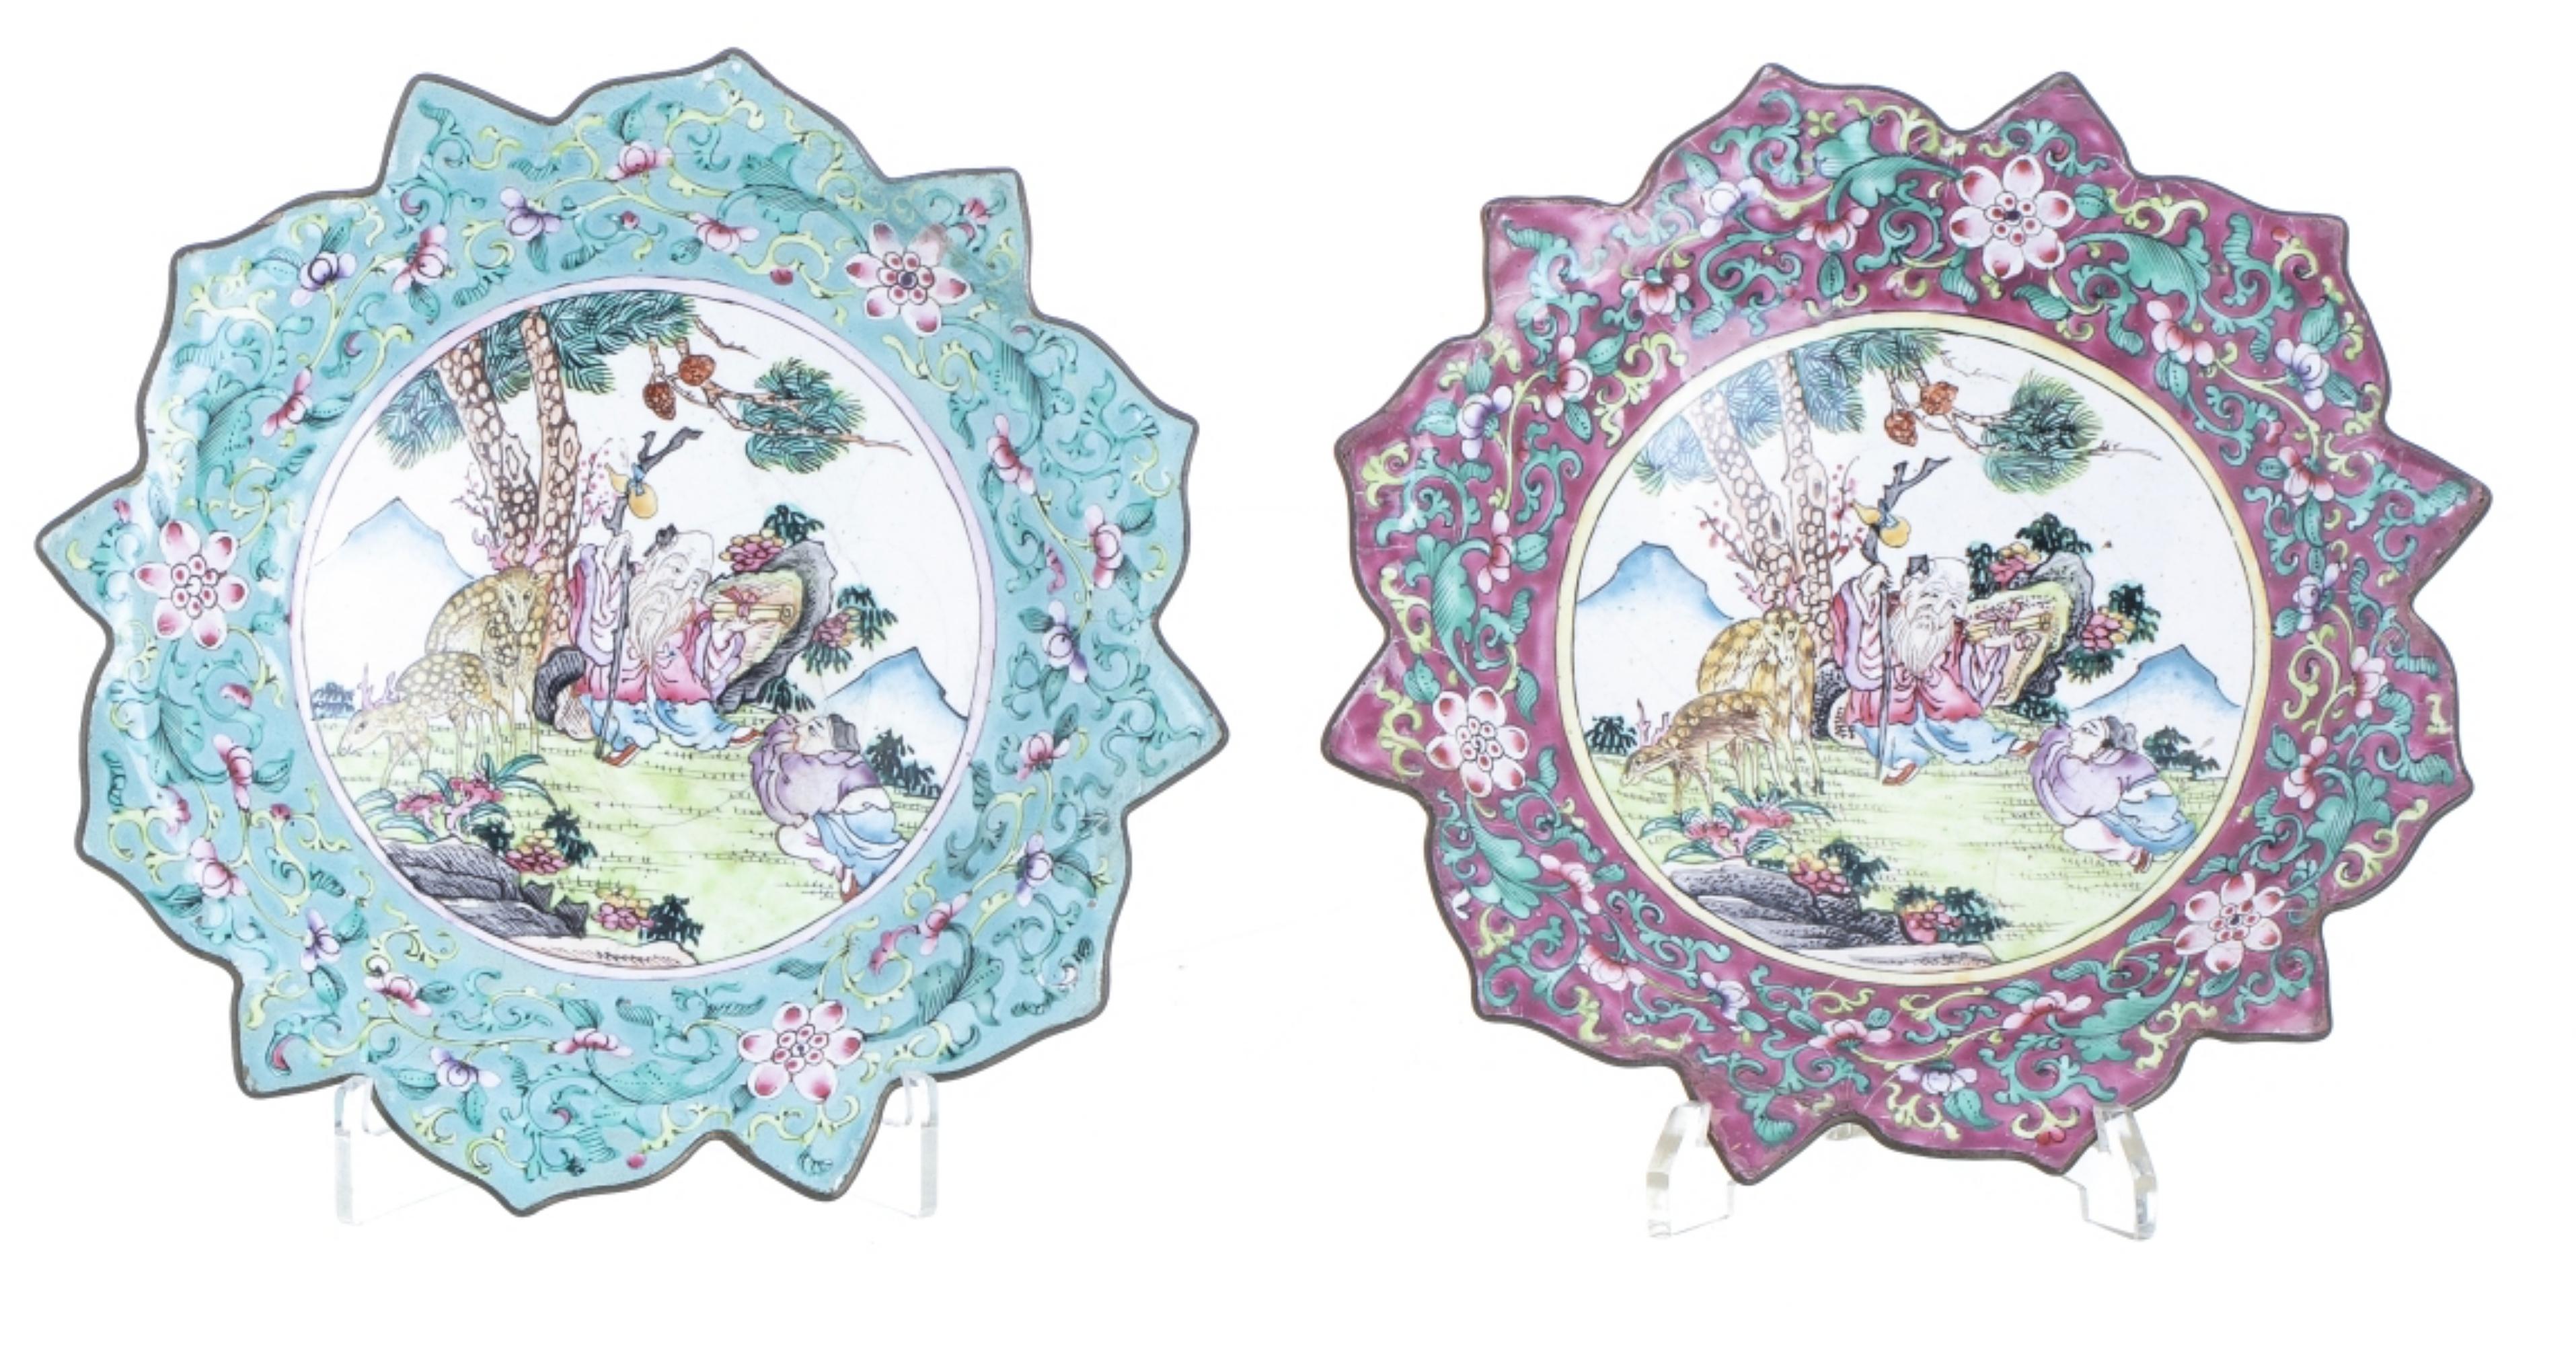 Rare Two Cut Out Plates.

Chinese, 17th century
in cloisonné enamelled metal, decorated with floral motifs with a reserve in the center with an oriental landscape representing figures and animals. 
Small restorations. 
Dia.: 19 cm.
Very good